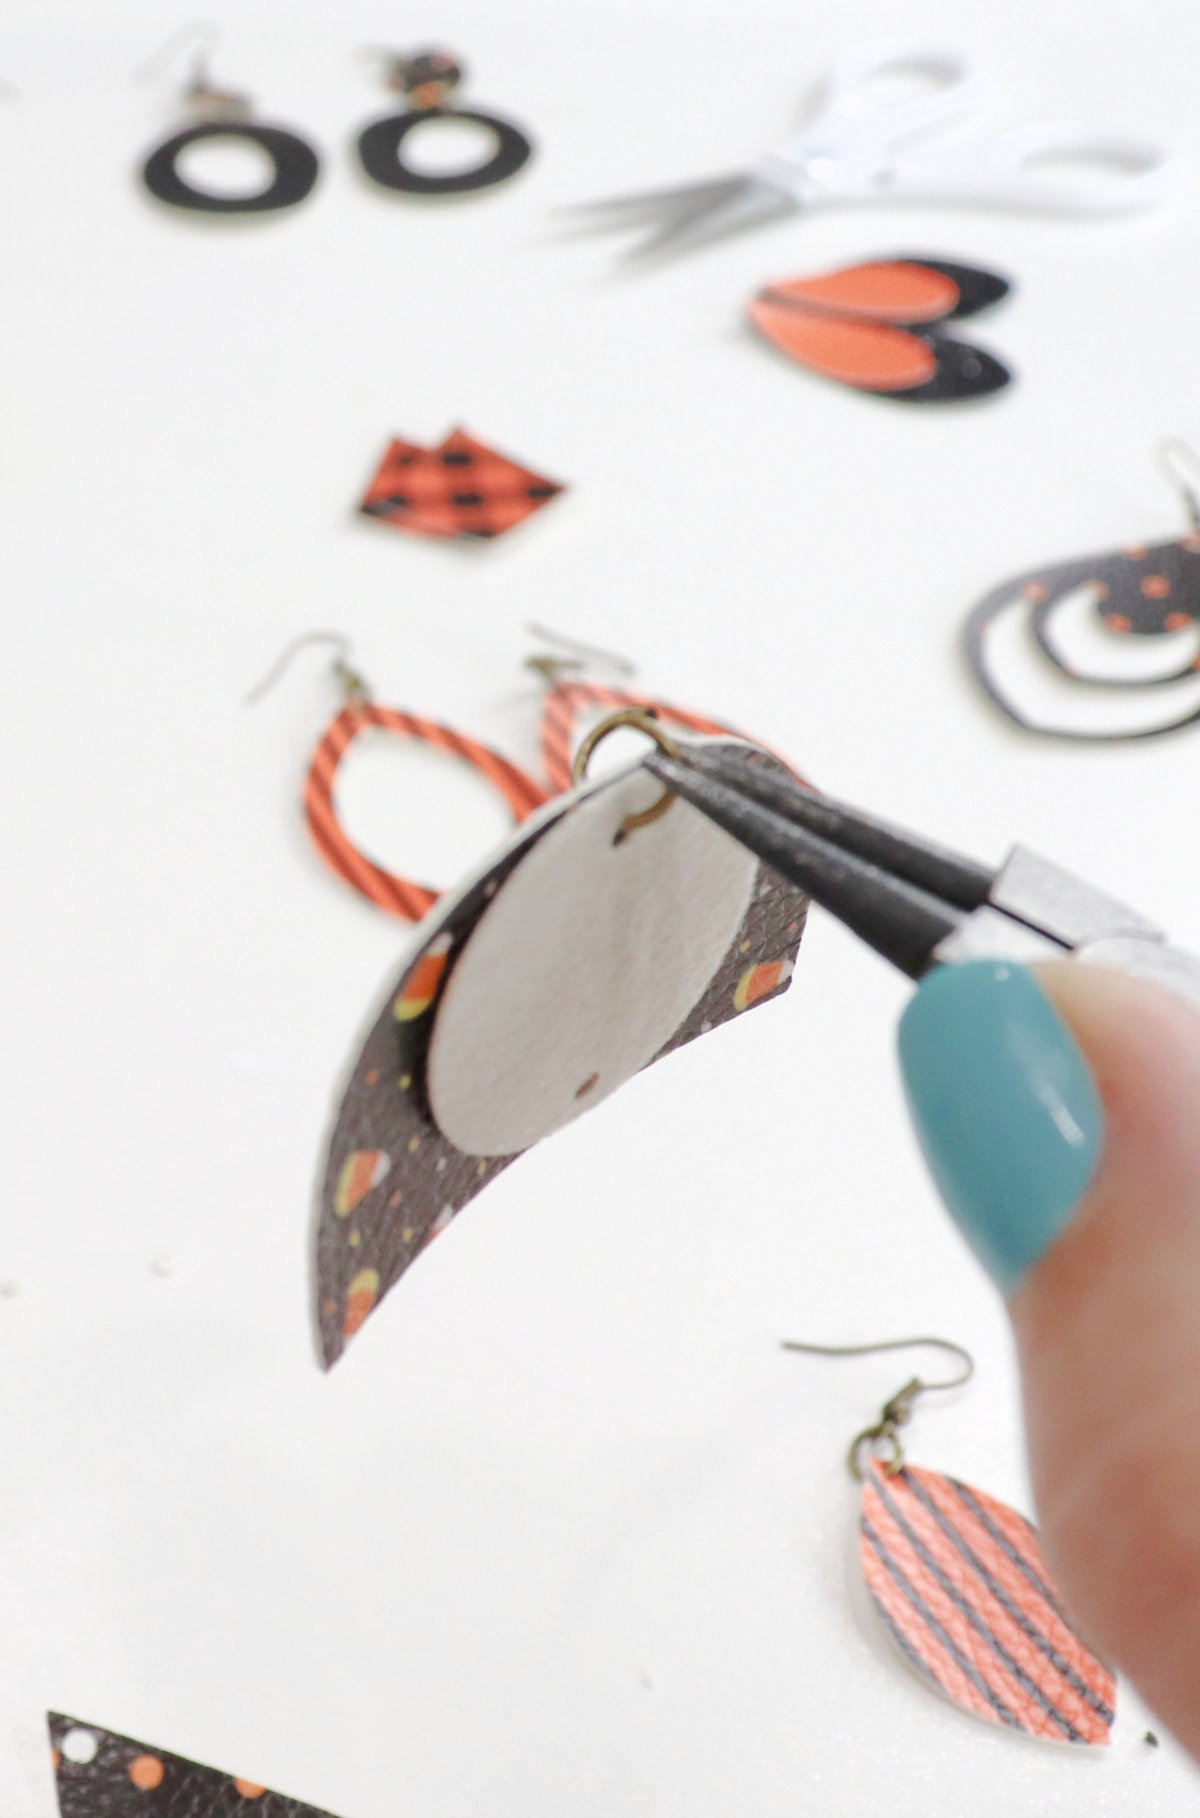 Image shows Amy's hand with a pair of needle nose pliers attaching two pieces of cut faux leather with a jump ring. In the background are multiple pairs of orange and black earrings and a pair of white-handled scissors.